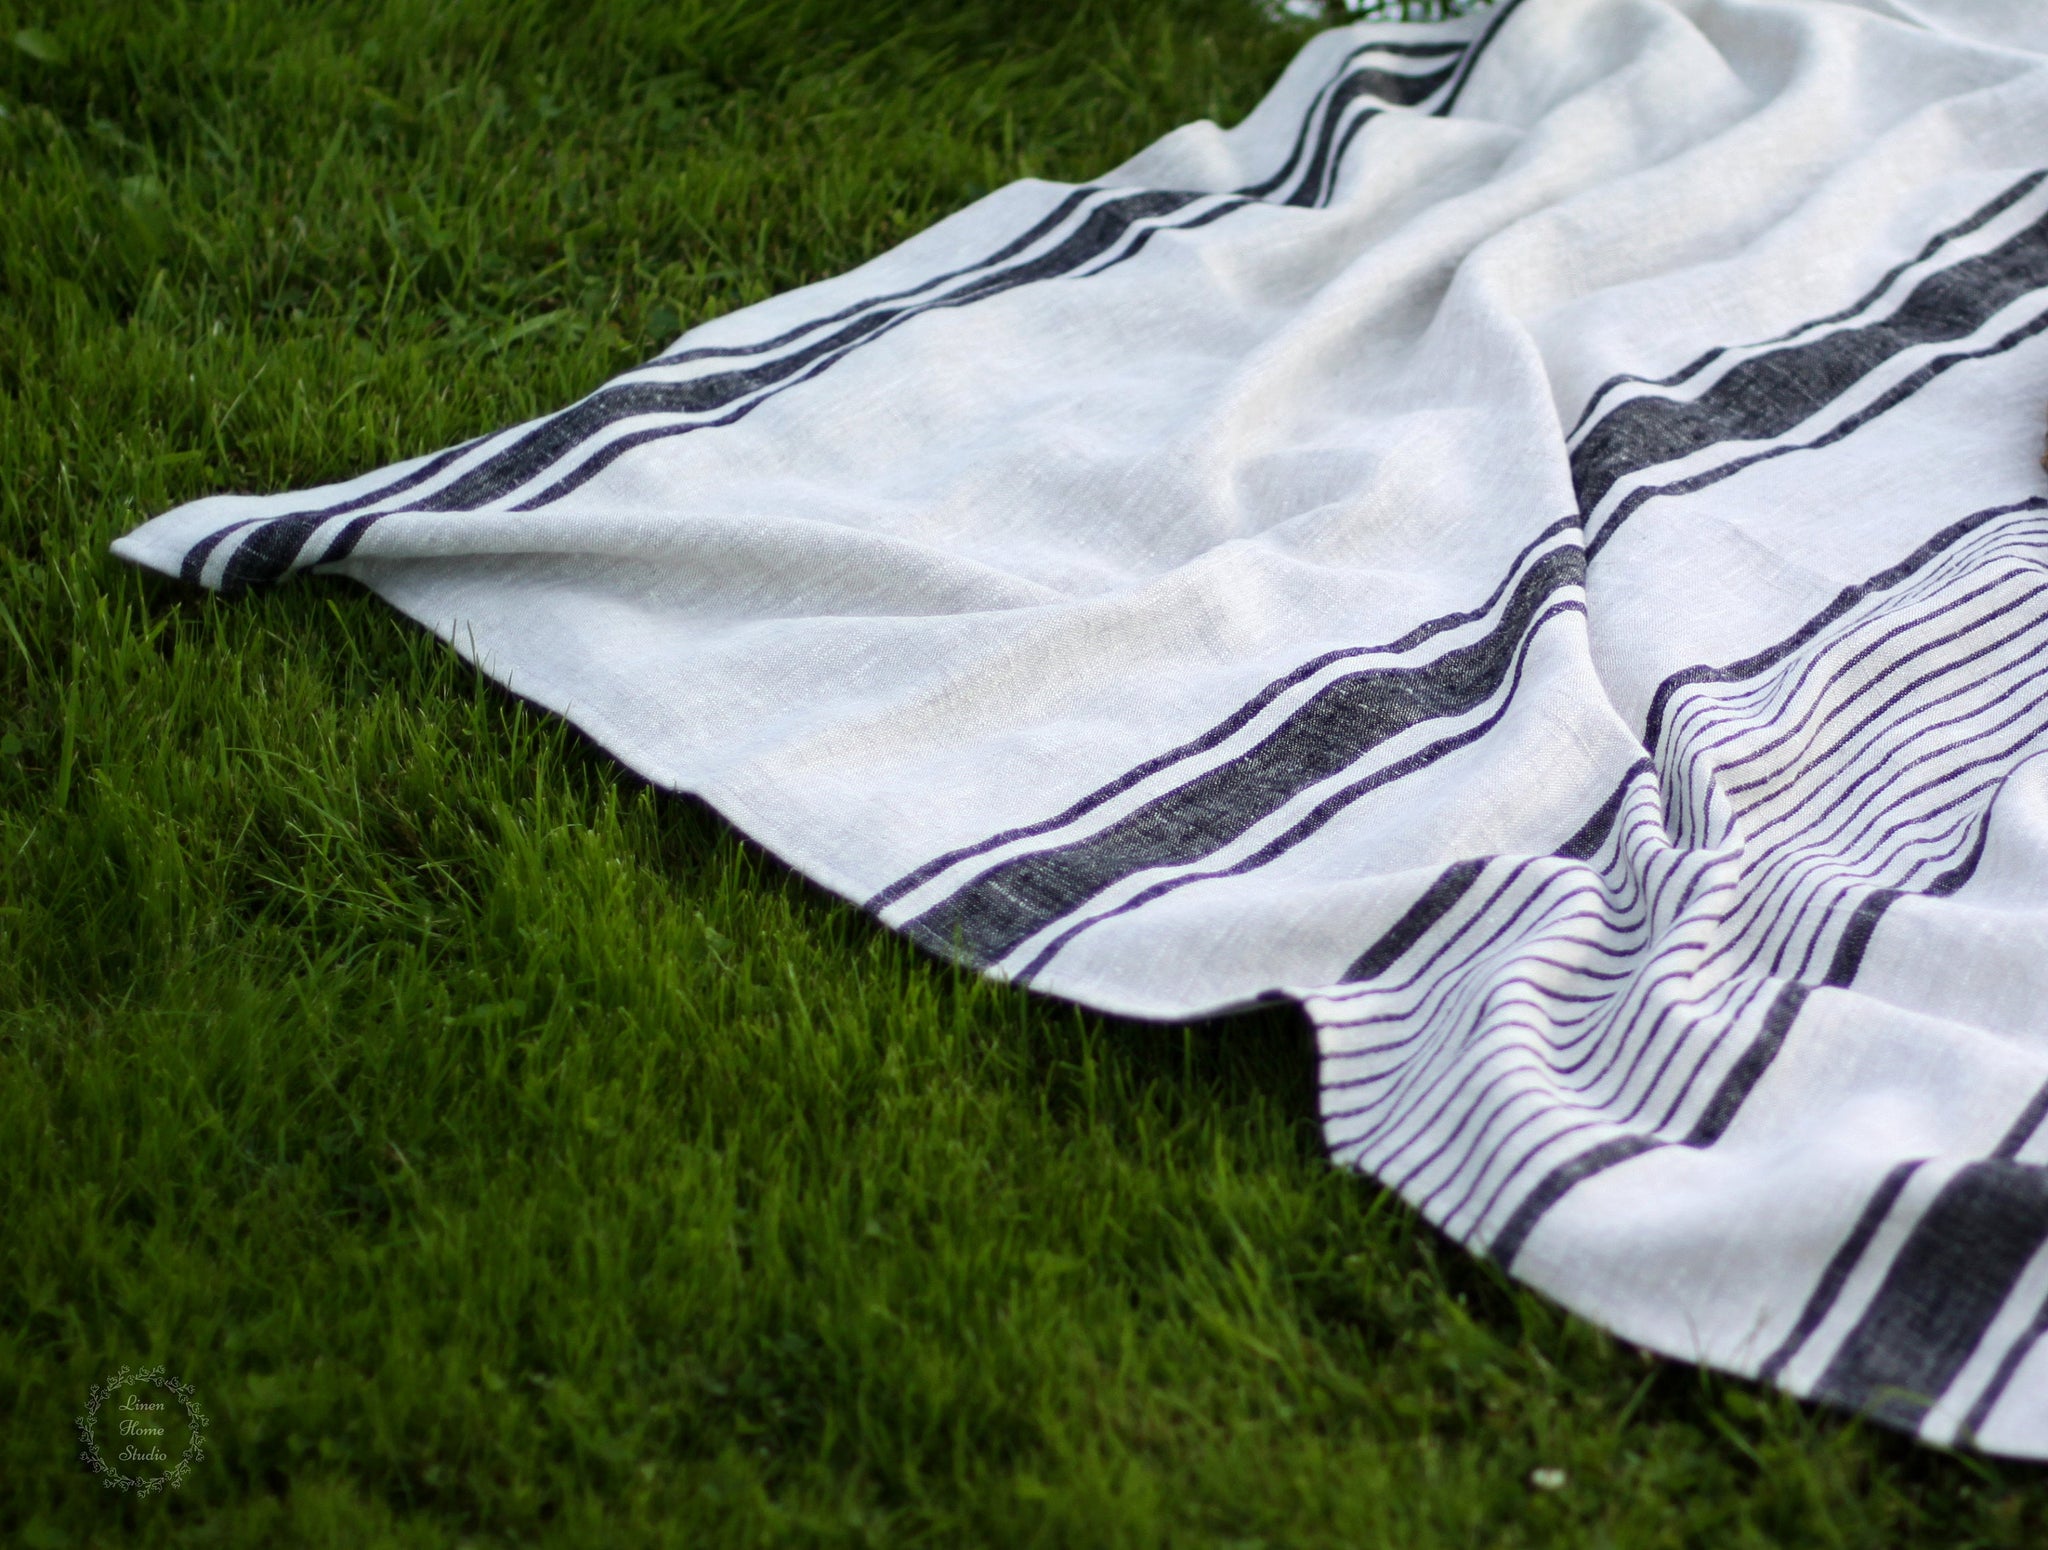 French style linen bath towels with green stripes